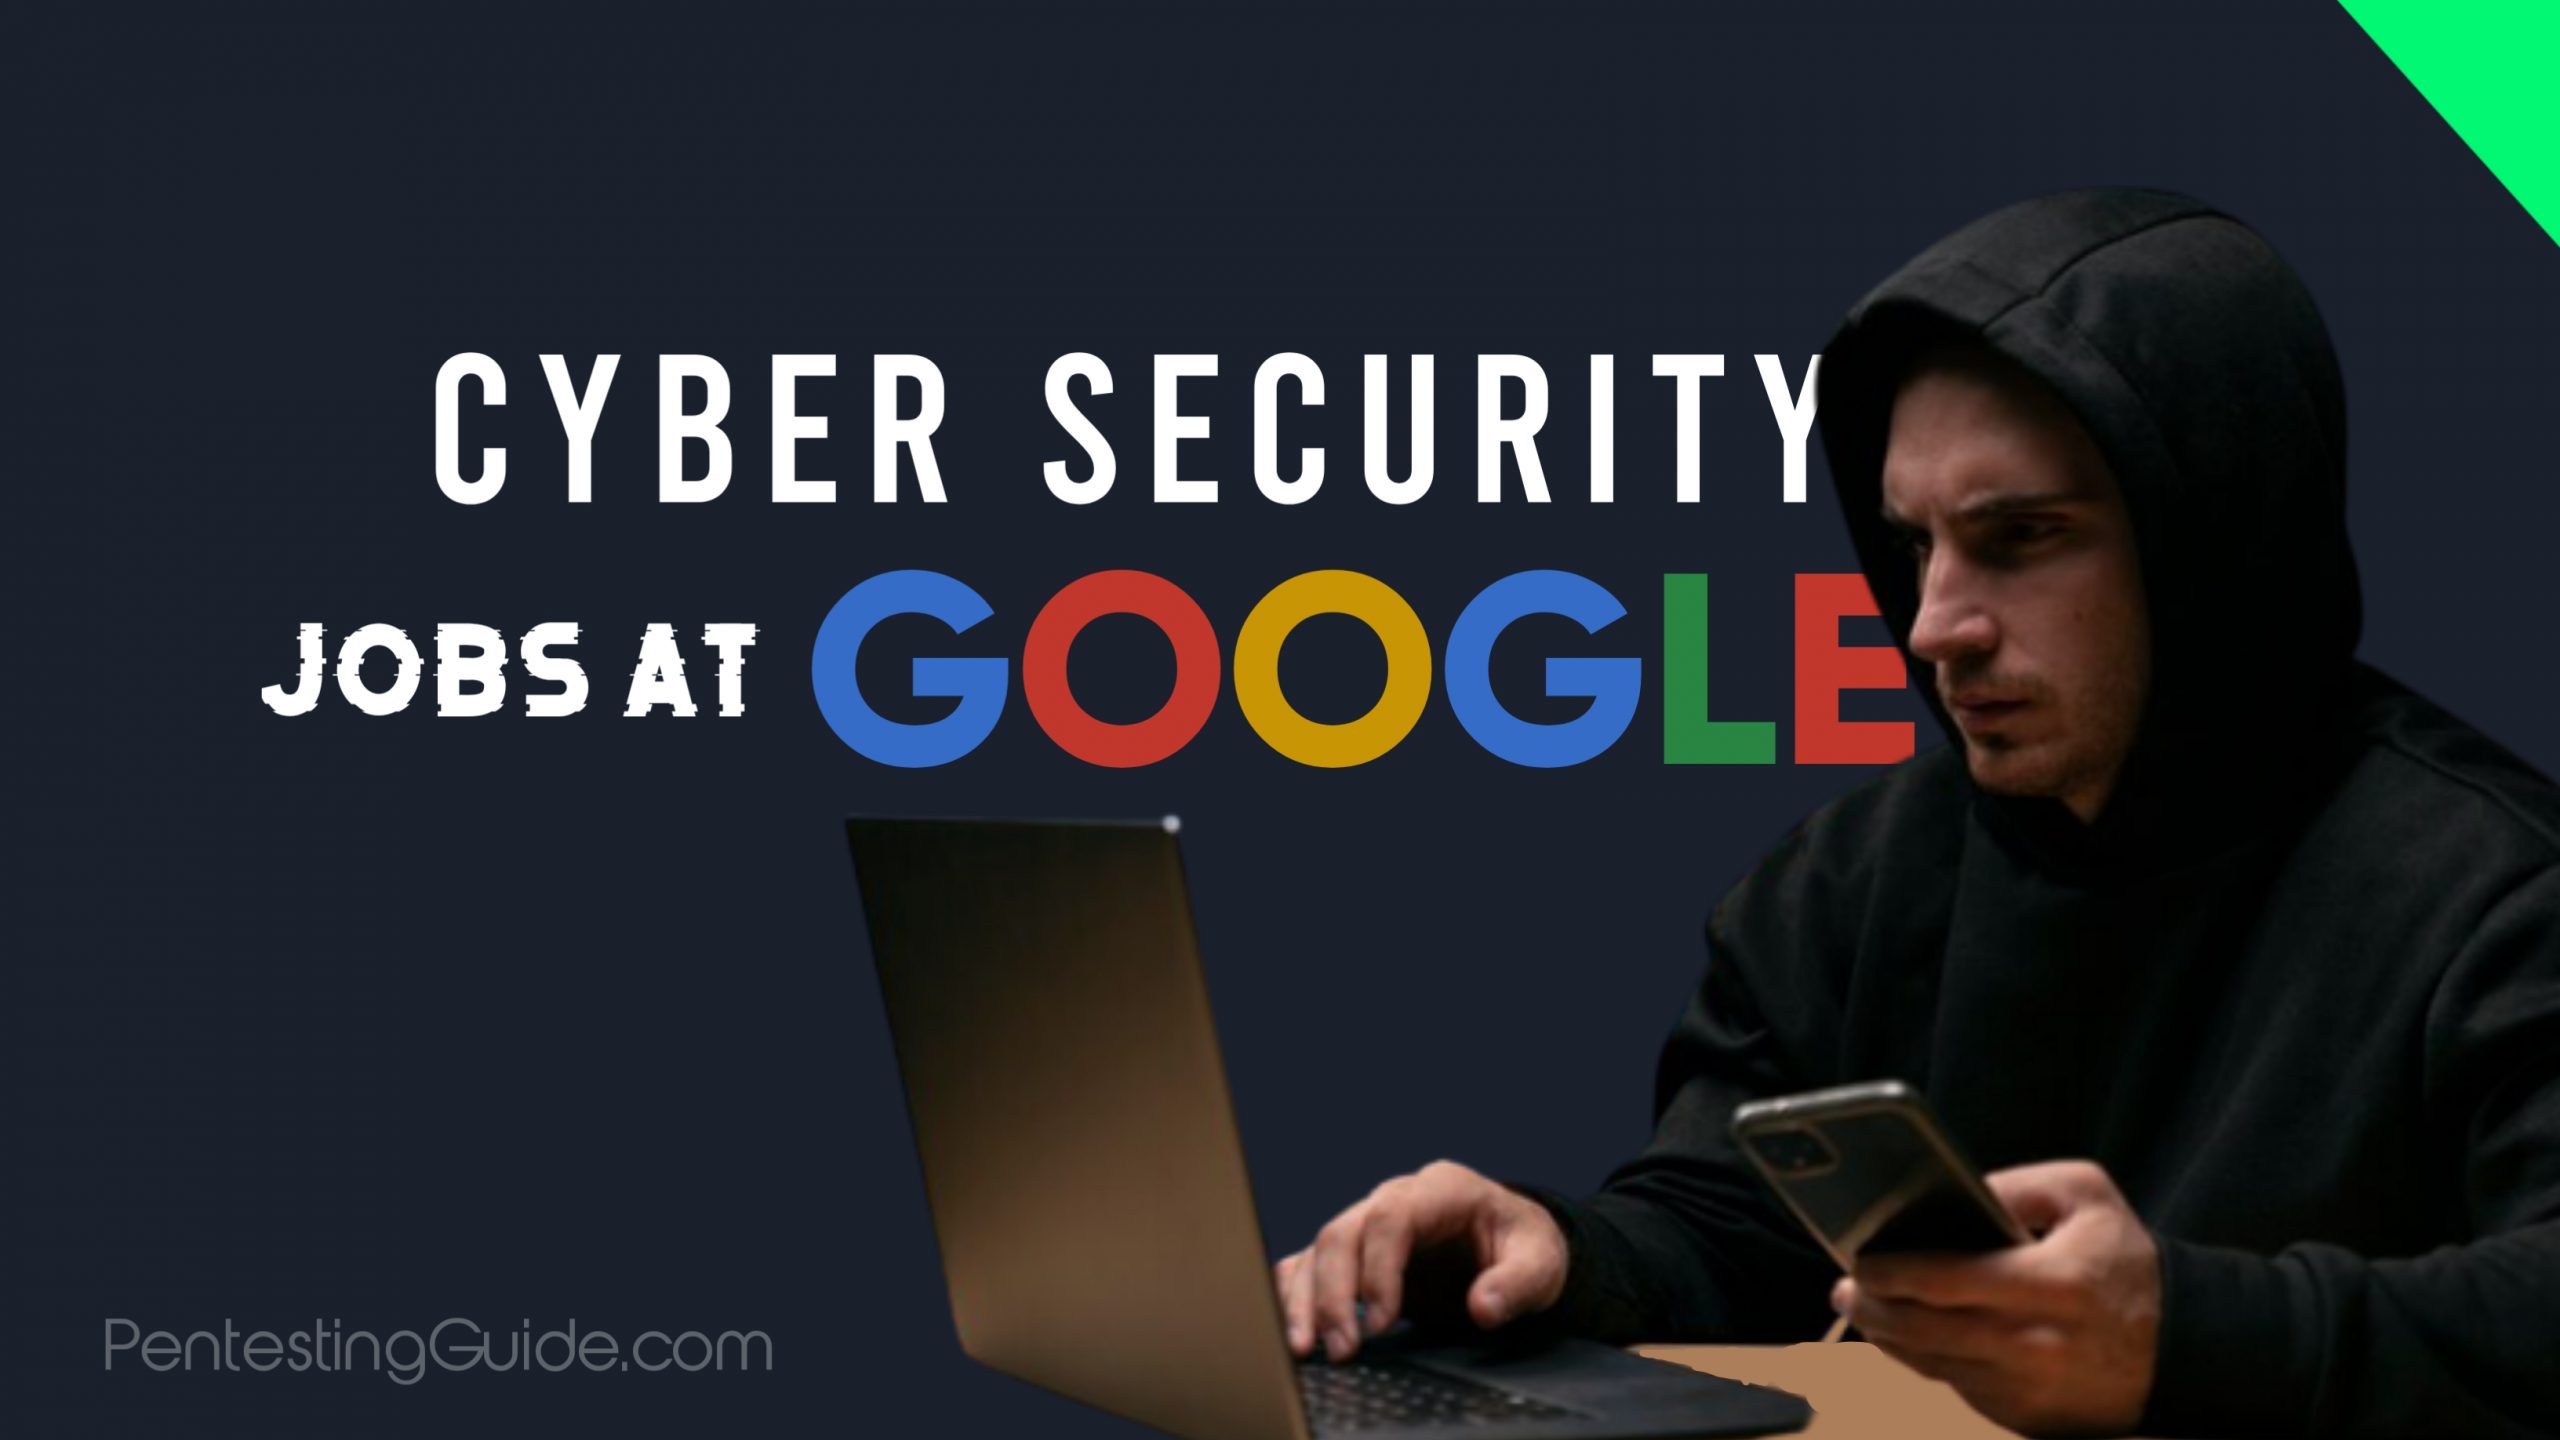 How to get Google Cyber Security Jobs (6 Tips)